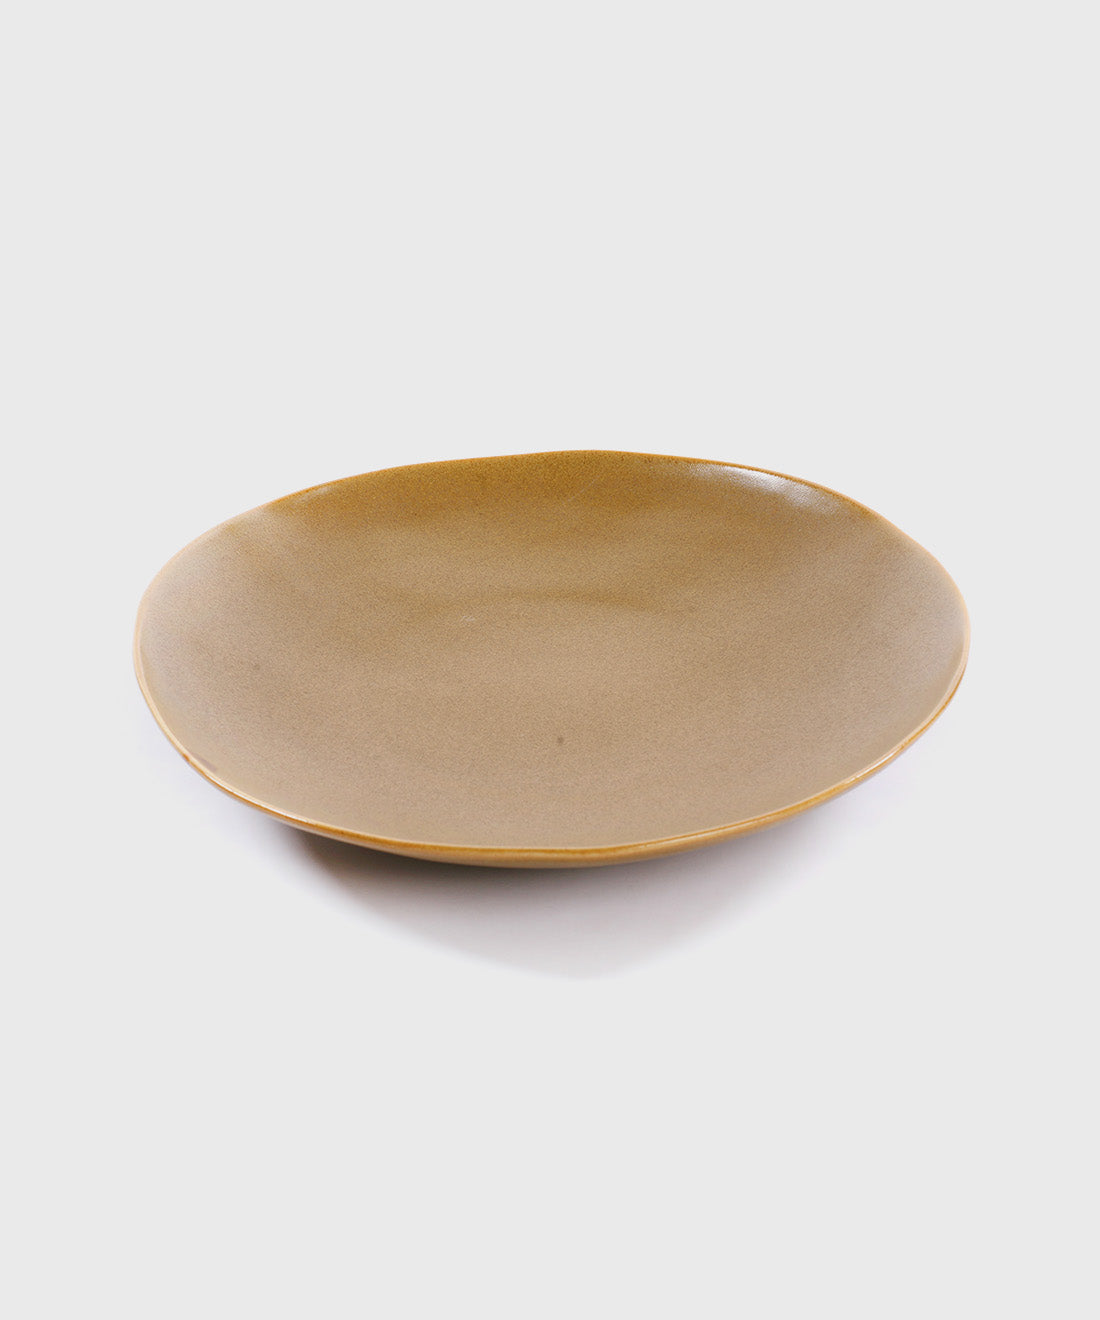 Extra Large Flat Round Bowl in Mustard